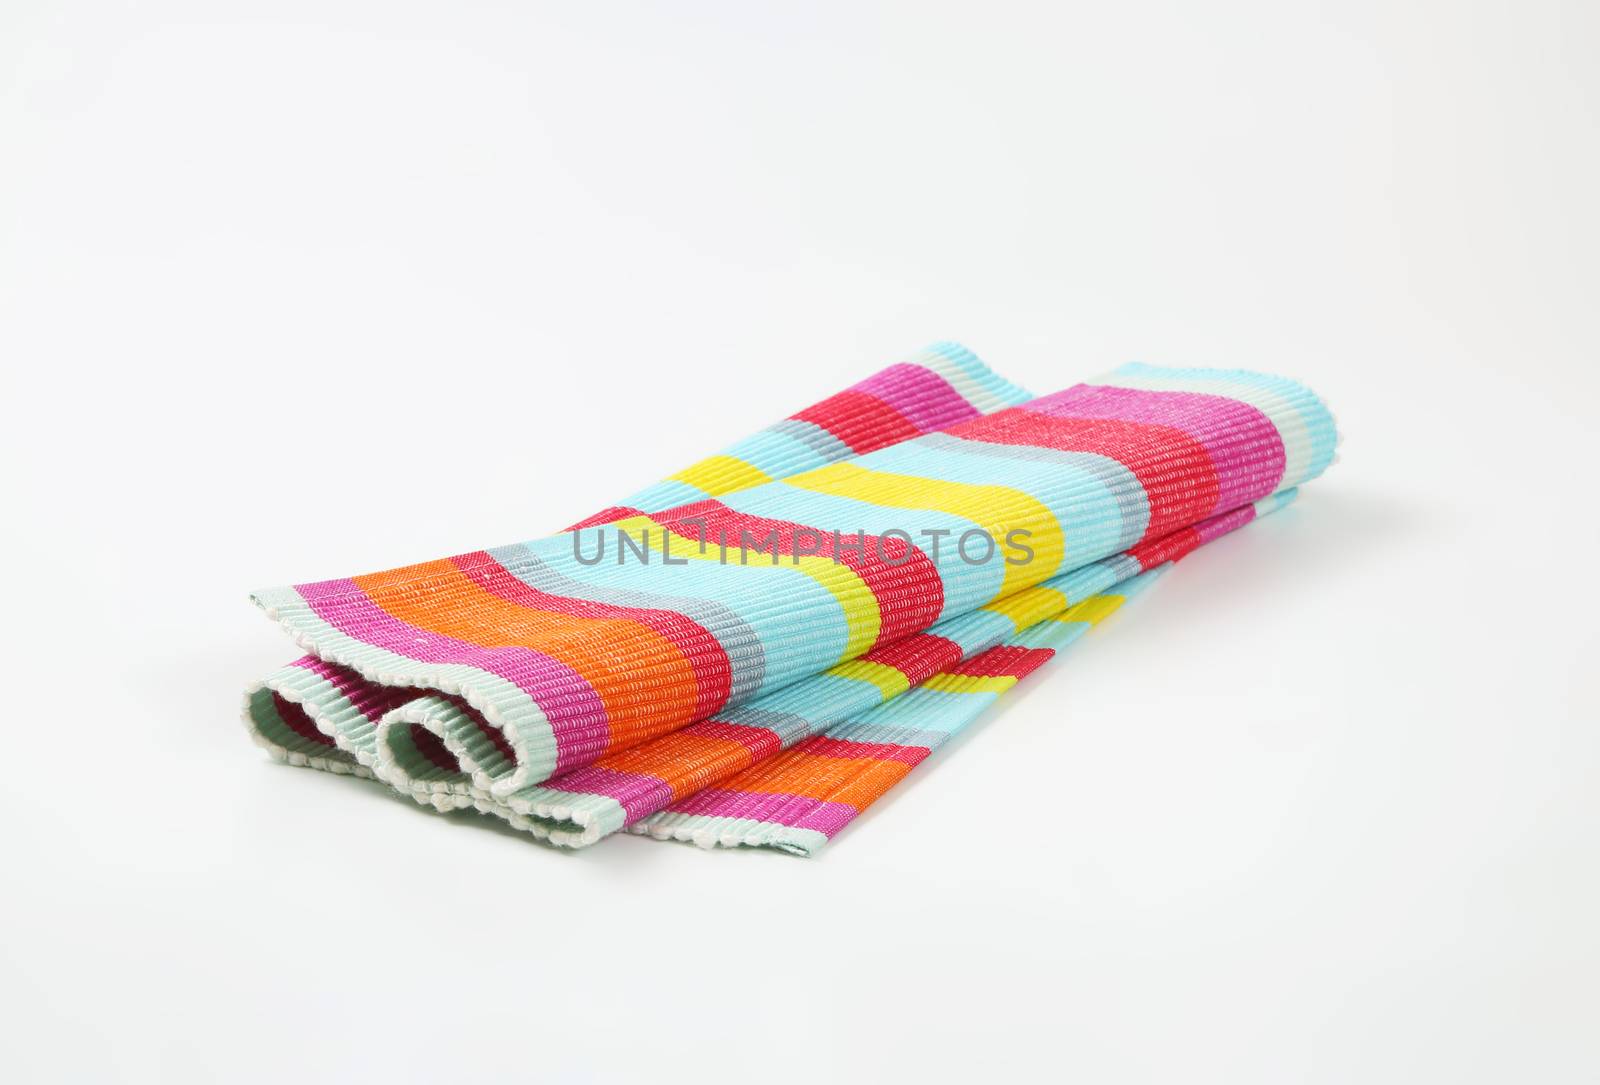 Colorful striped ribbed woven cotton place mat - folded